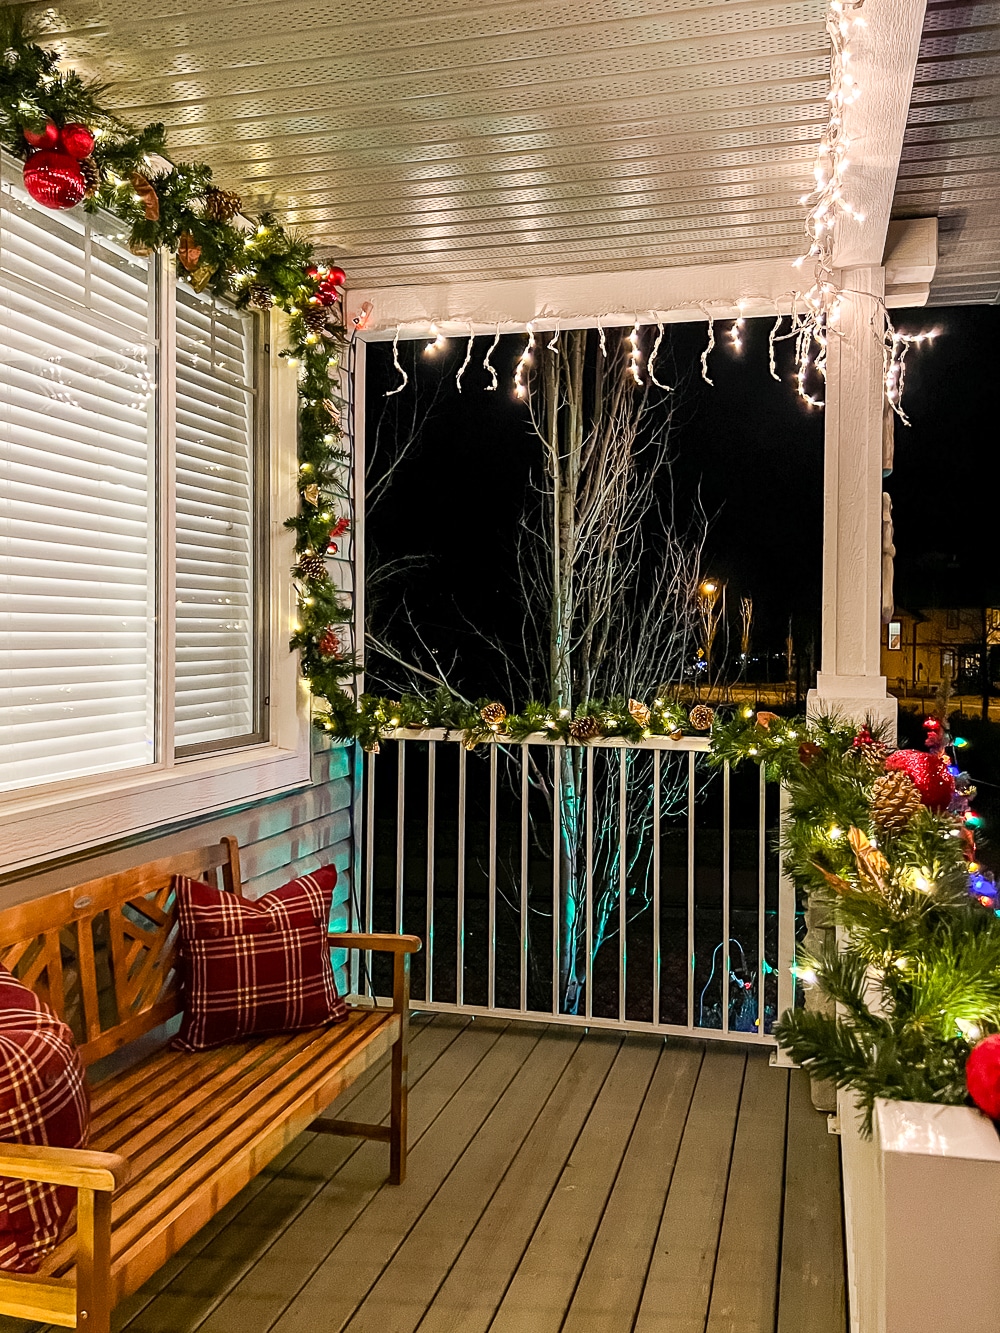 A cozy looking porch decorated for Christmas at night